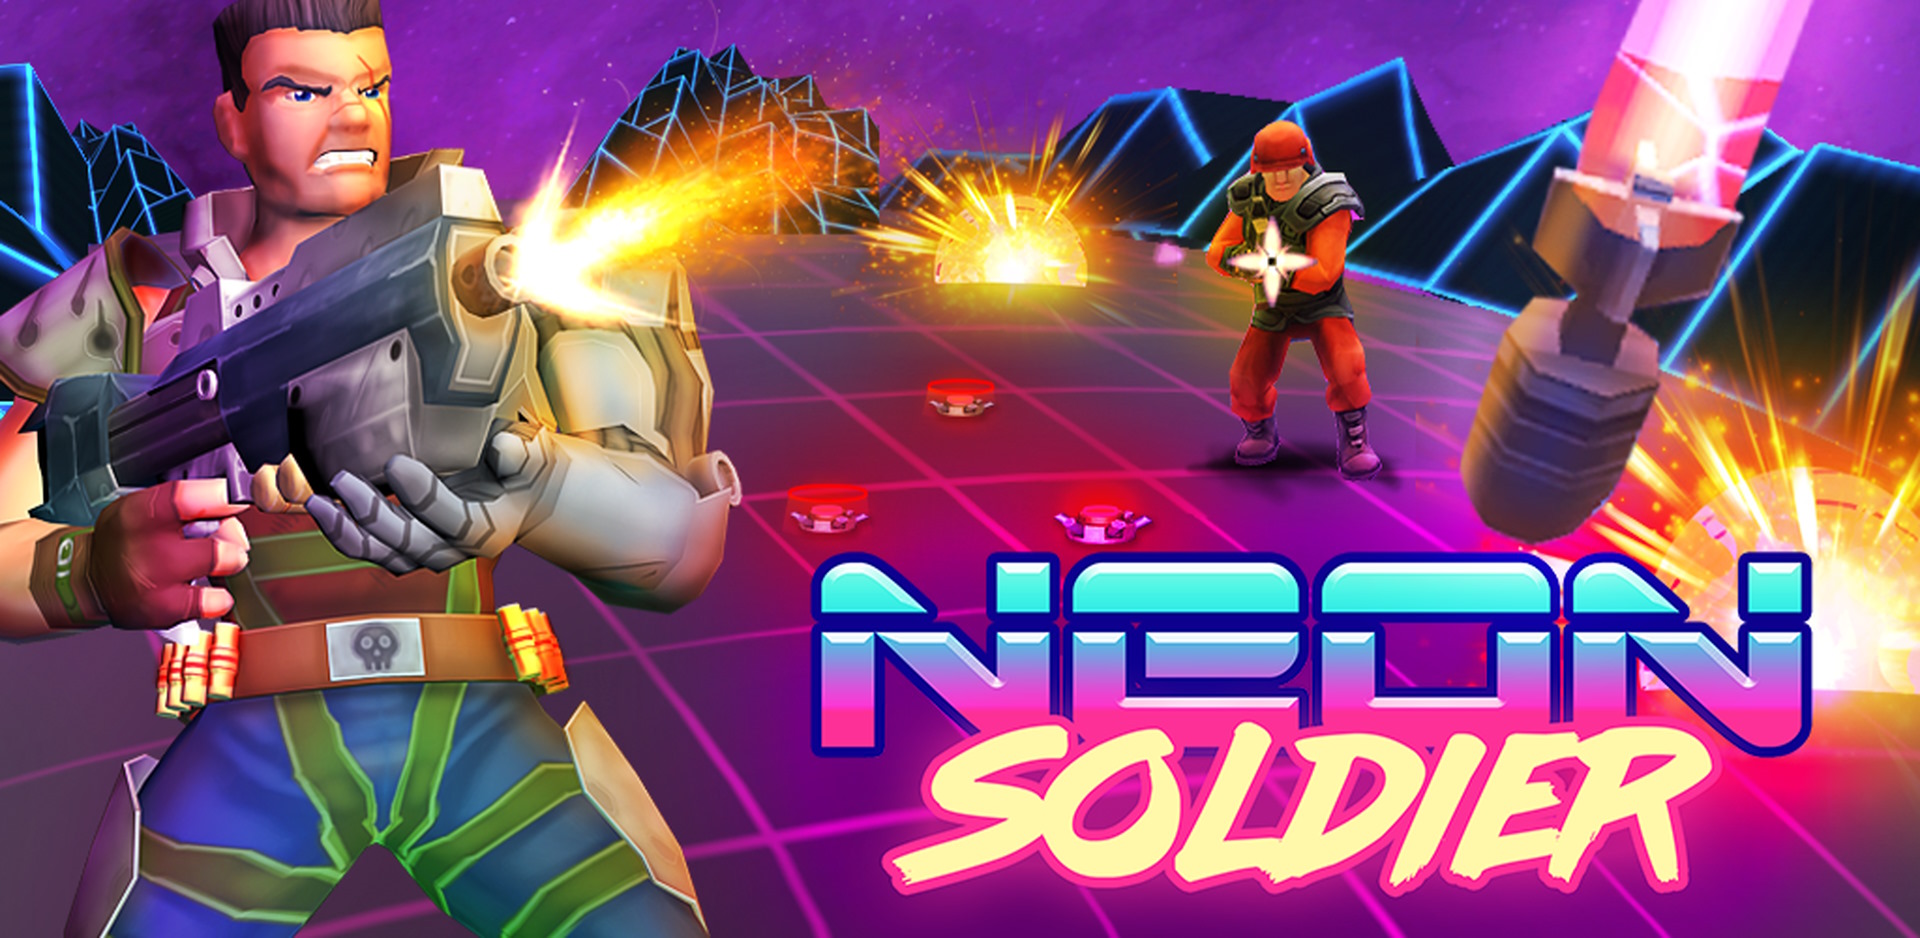 Futuristic Shooter game! Cyber Punk Neon Soldier fights VS War Robots Machines mobile game